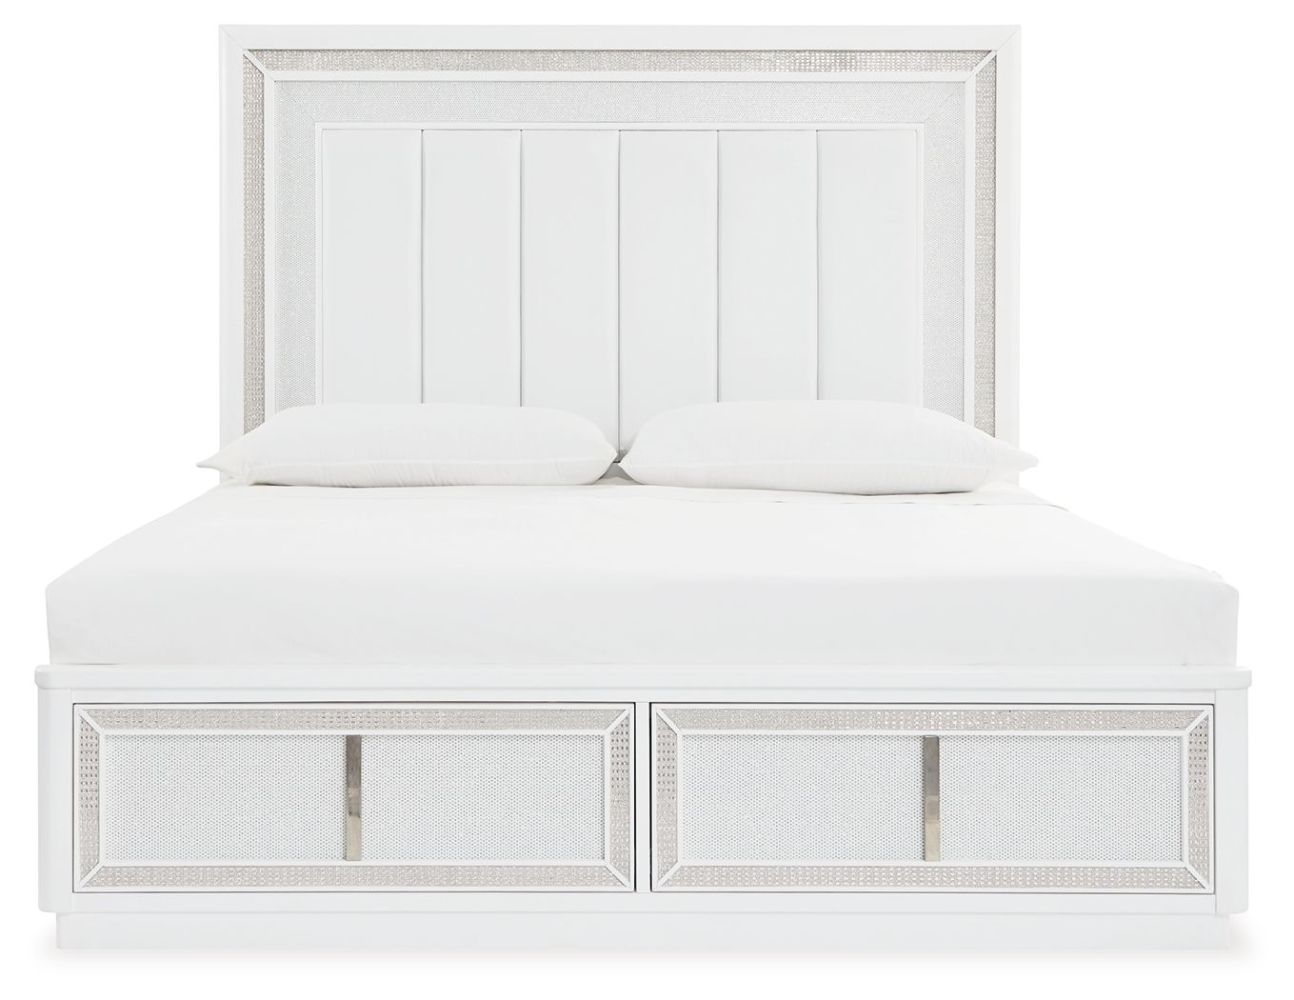 Chalanna – White – 8 Pc. – Dresser, Mirror, Chest, California King Upholstered Storage Bed, 2 Nightstands B822/31/36/46/58/56S/94/92(2)